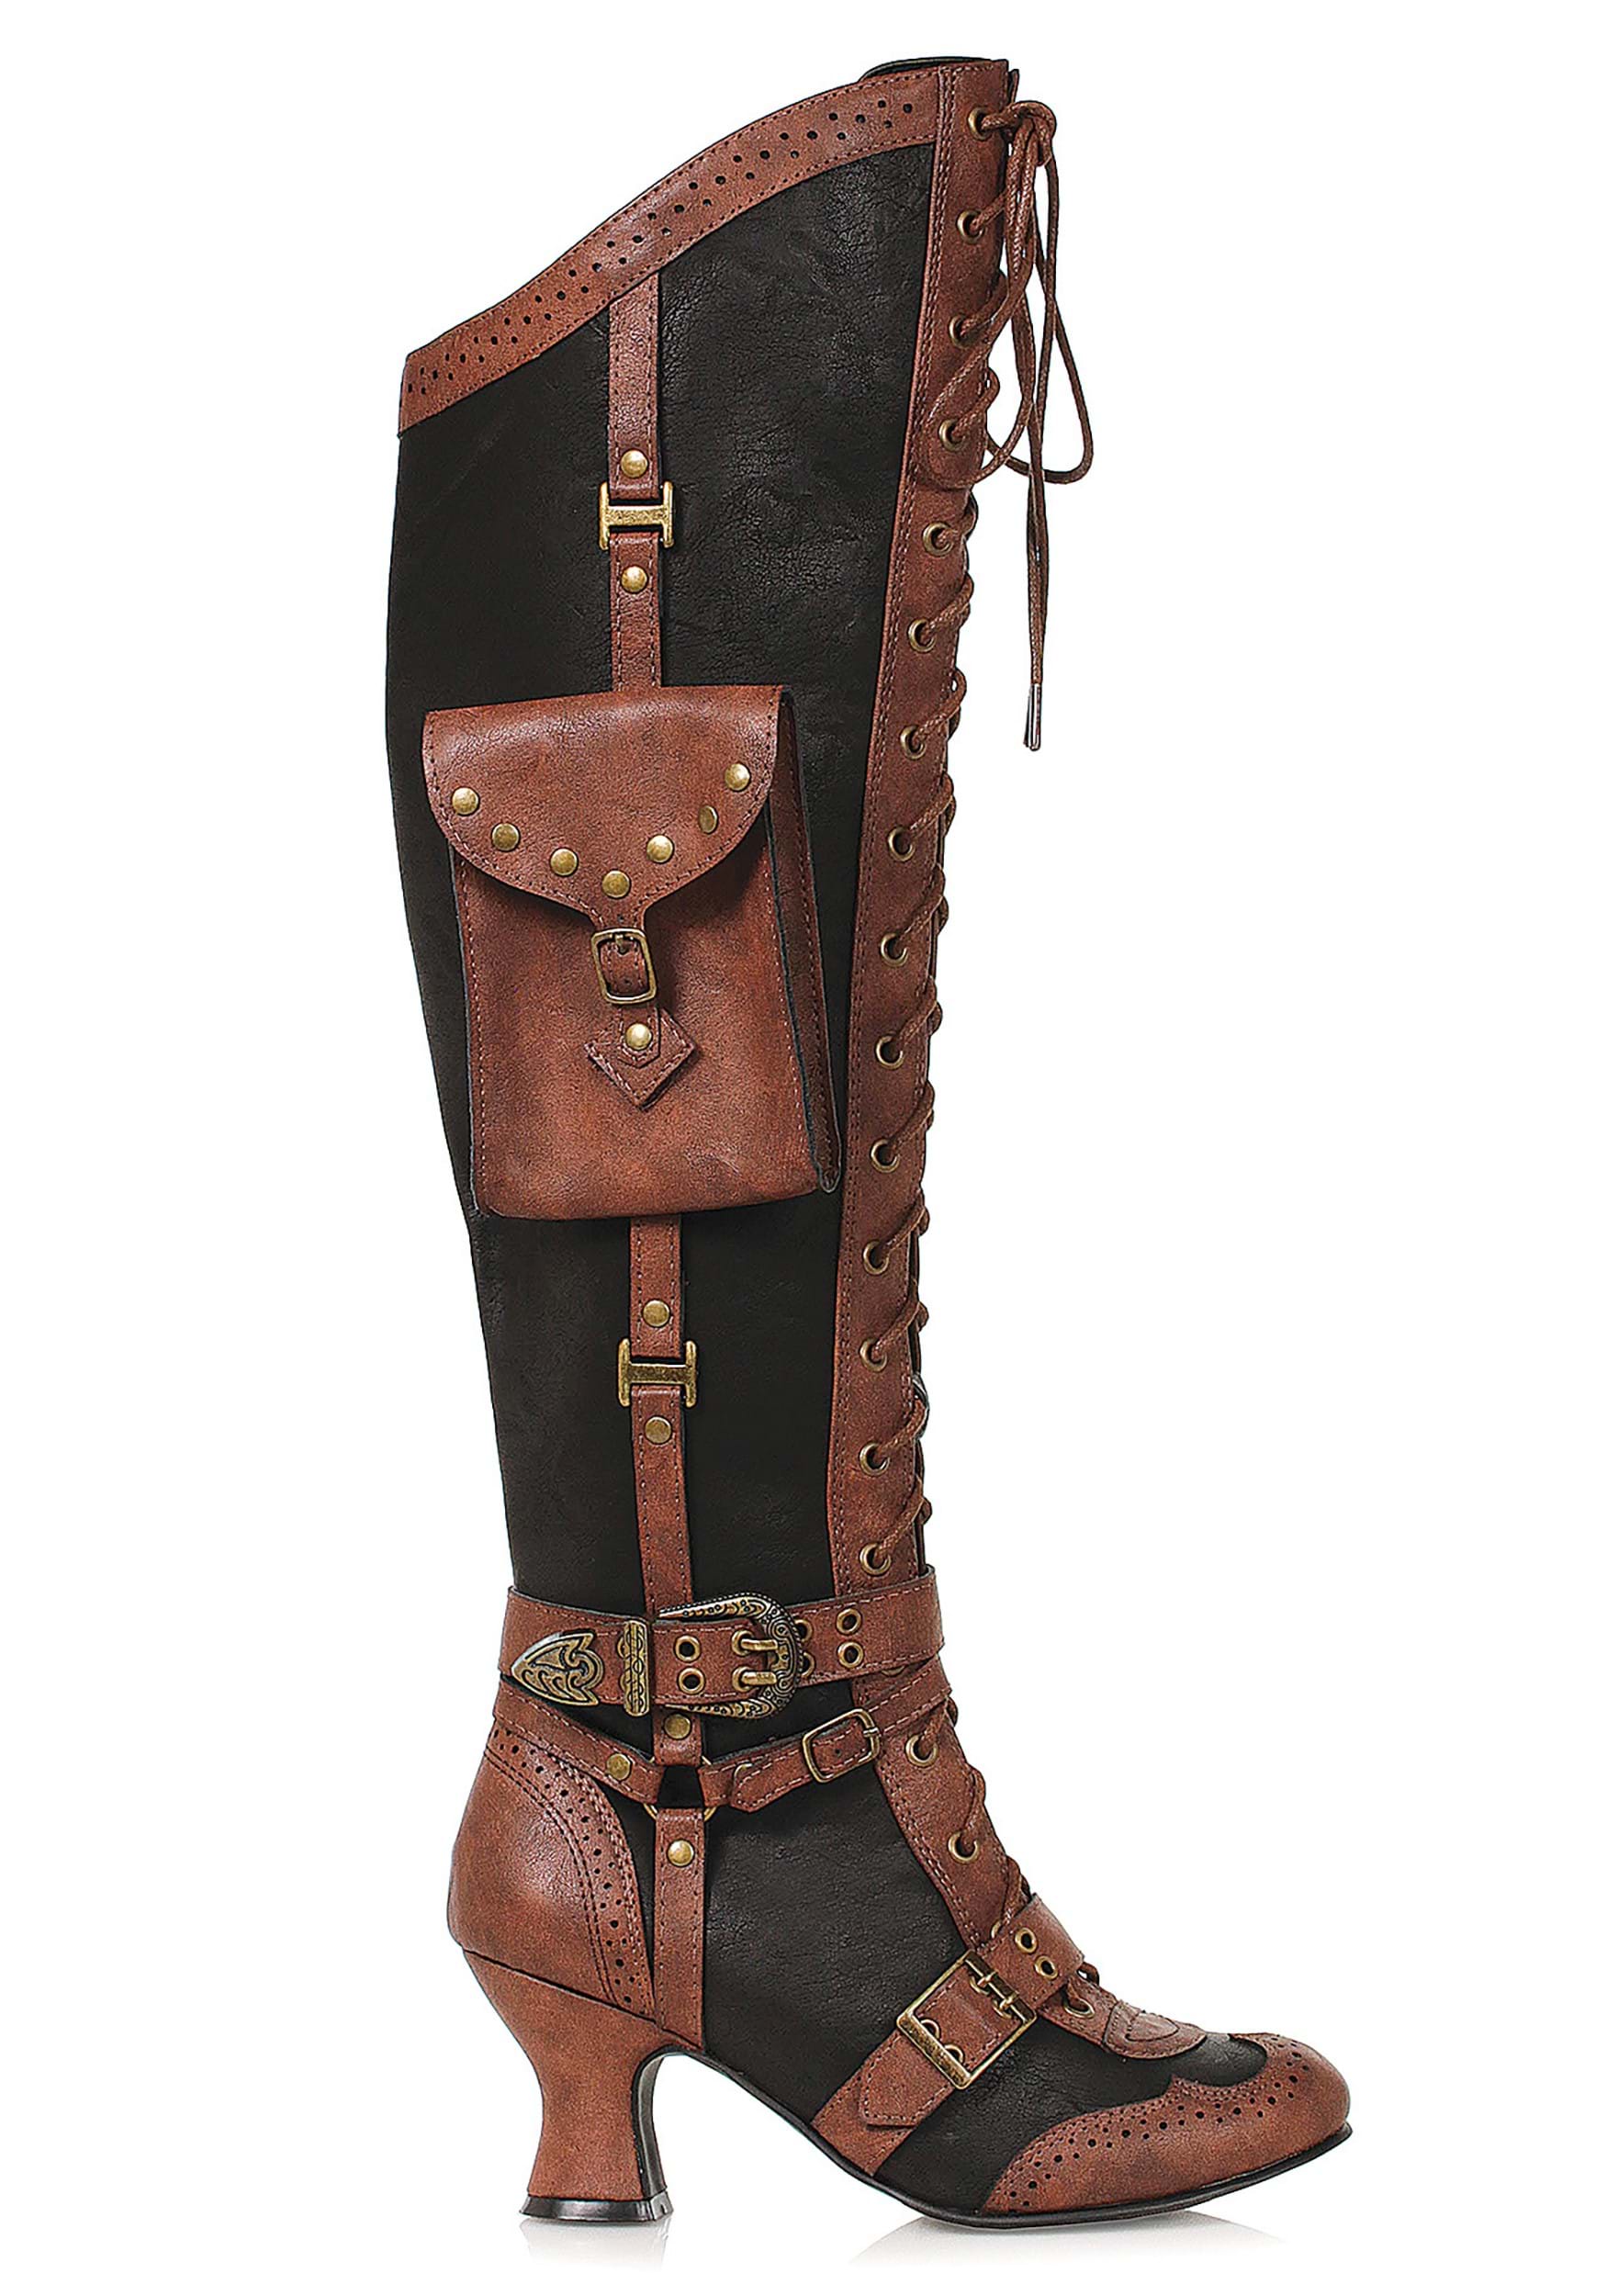 Image of Lace Up Steampunk Heeled Boots ID EE254INGRIDBR-6